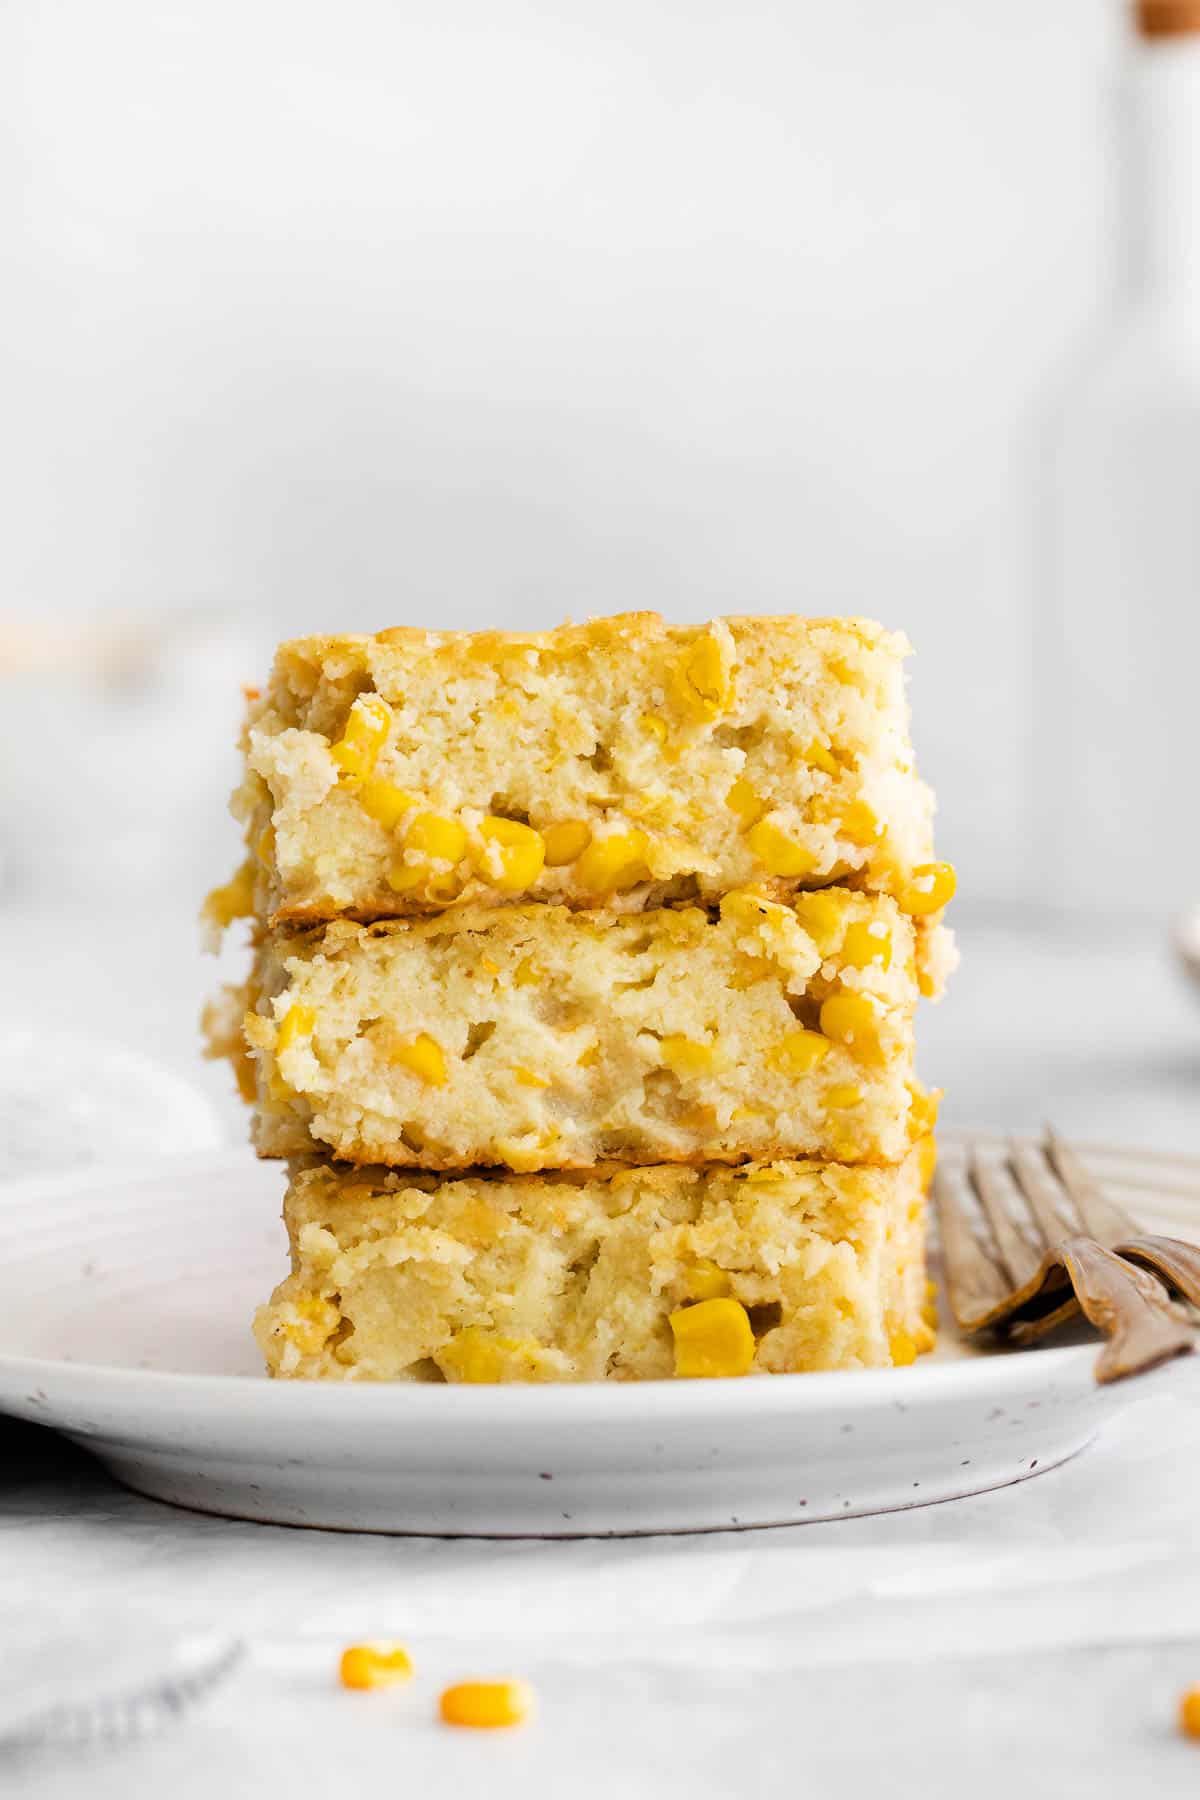 Gluten-free corn casserole slices stacked on a plate